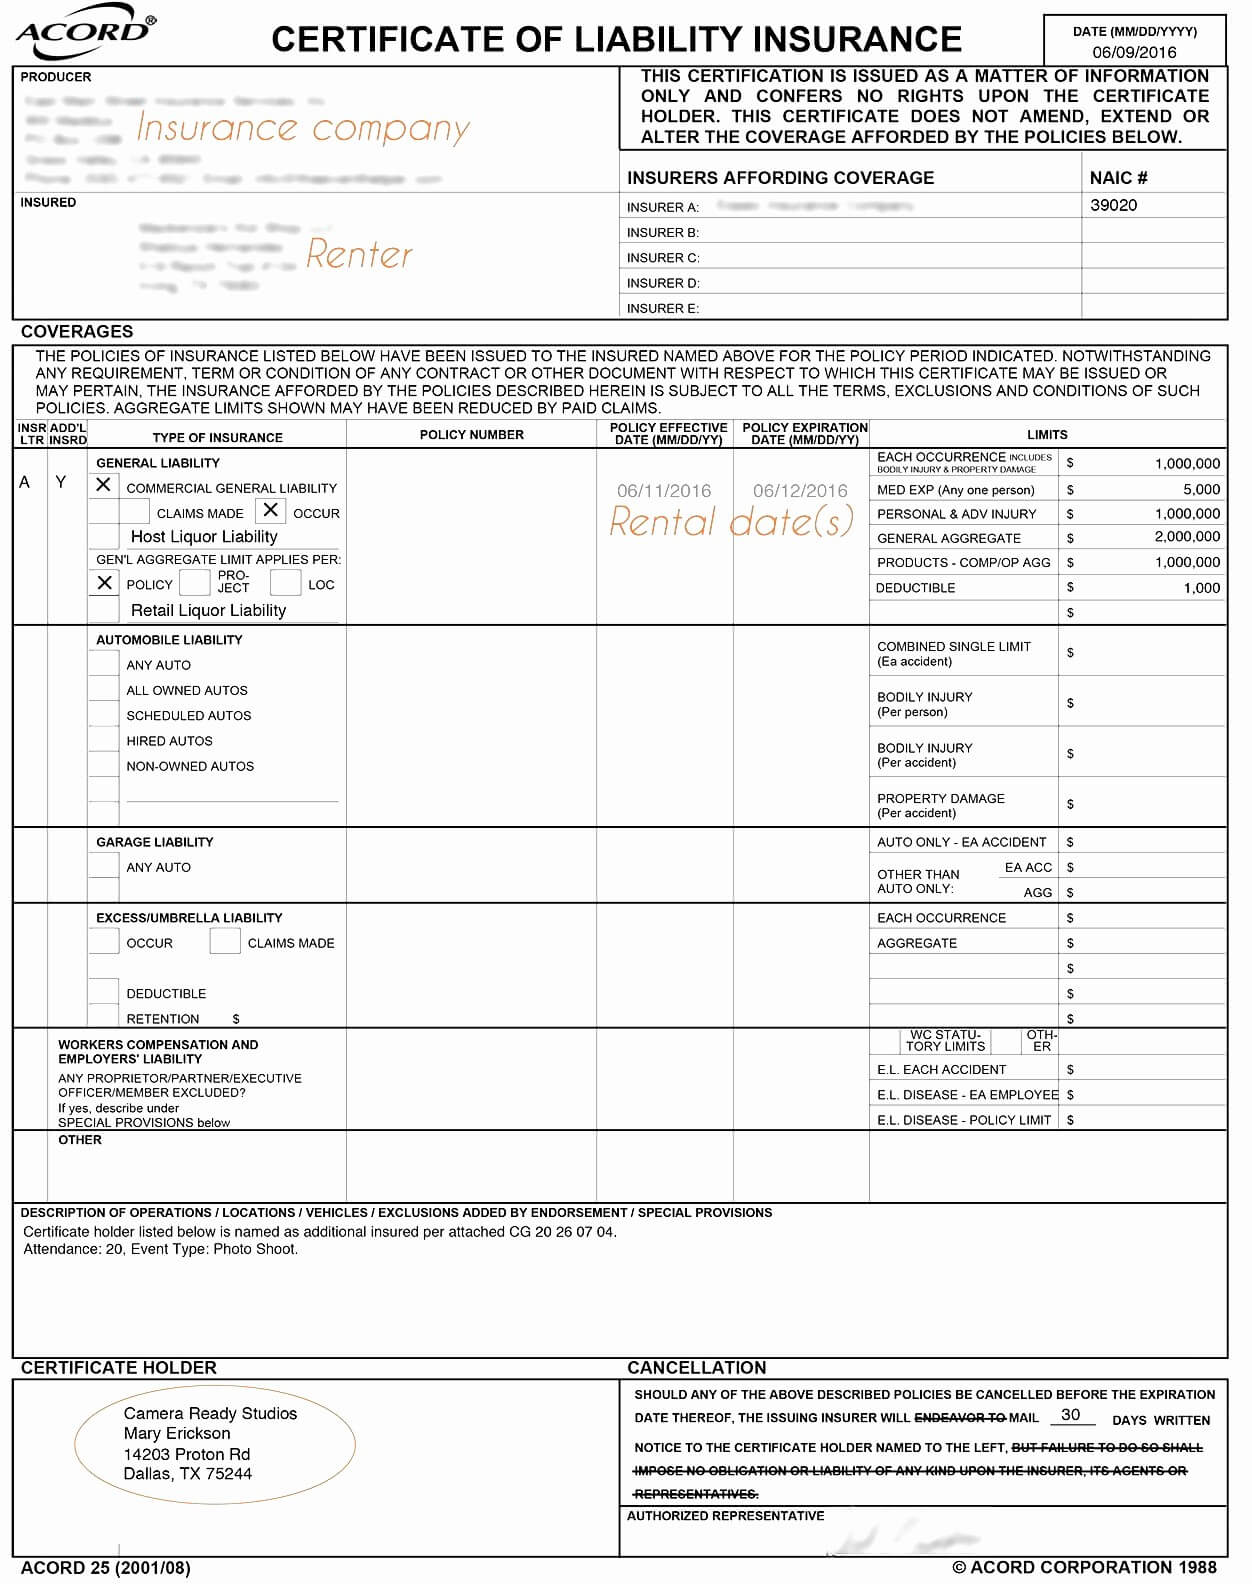 009 20Acord Form Fresh Certificate Liability Insurance Inside Certificate Of Liability Insurance Template